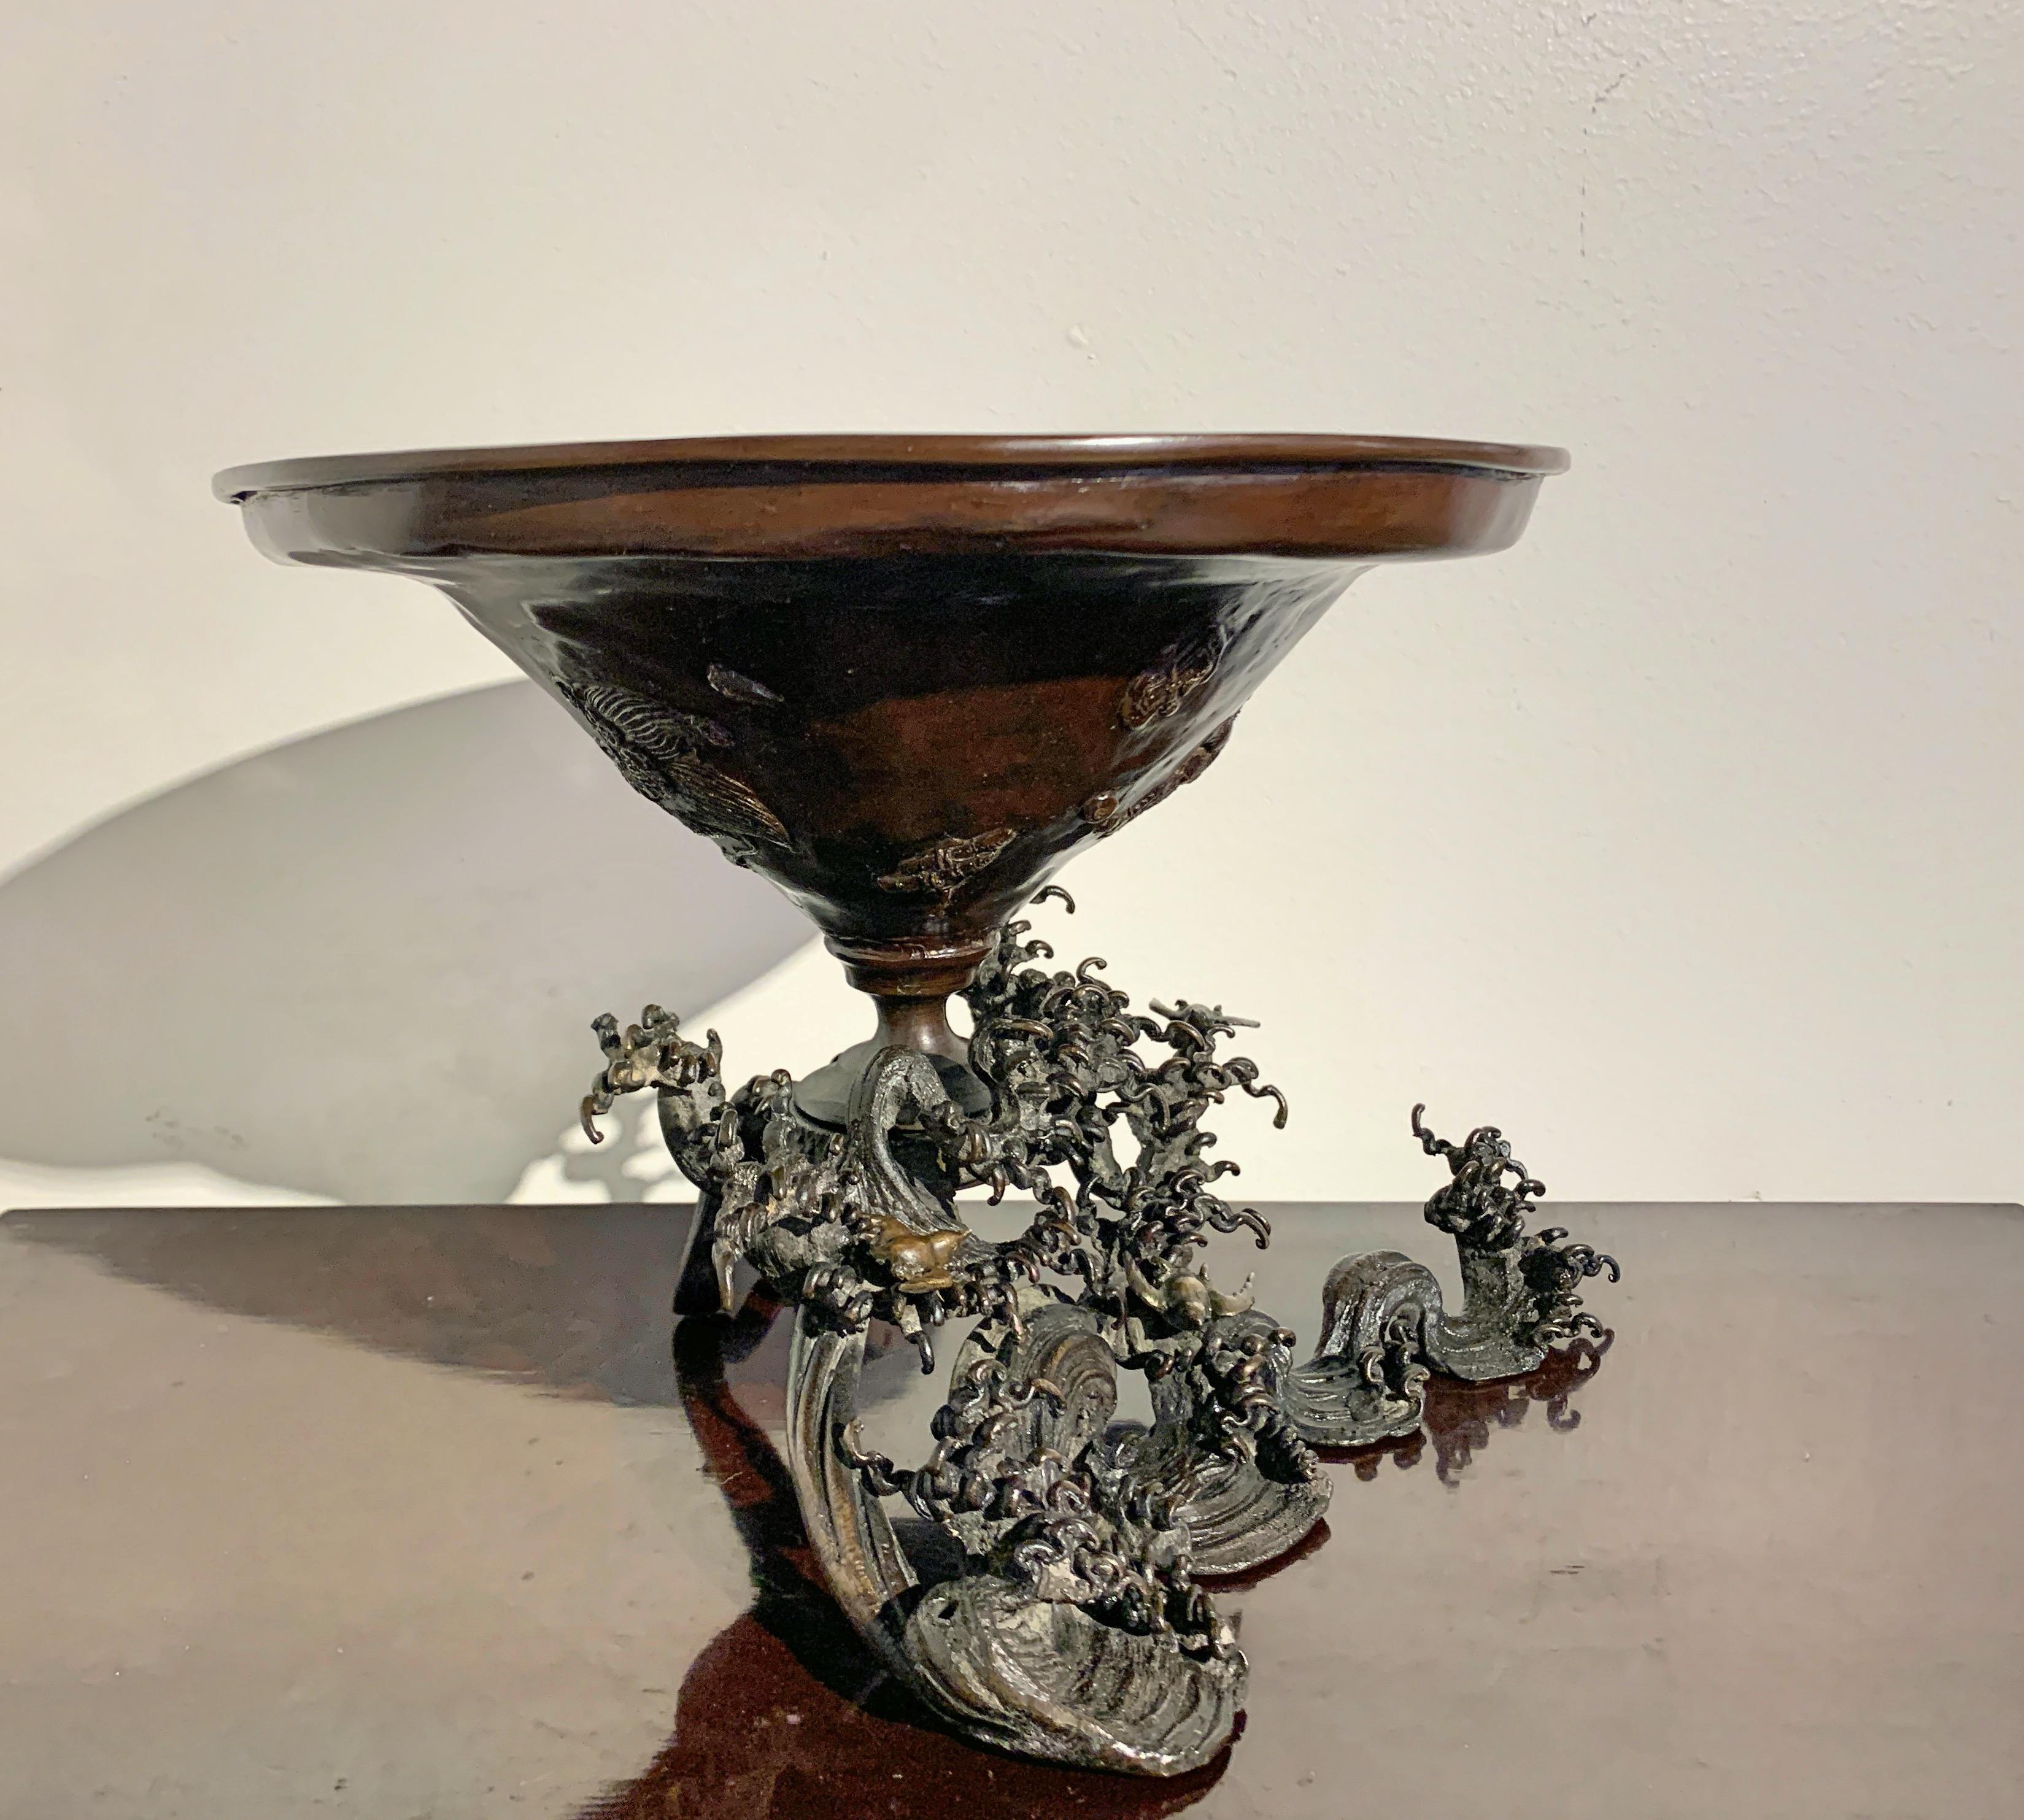 An impressive Japanese cast bronze usubata, vessel for ikebana, in the form of a large conical vessel being supported by crashing waves and flying chidori. Edo Period, mid-19th century or earlier, Japan.

An usubata is an essential vessel for some